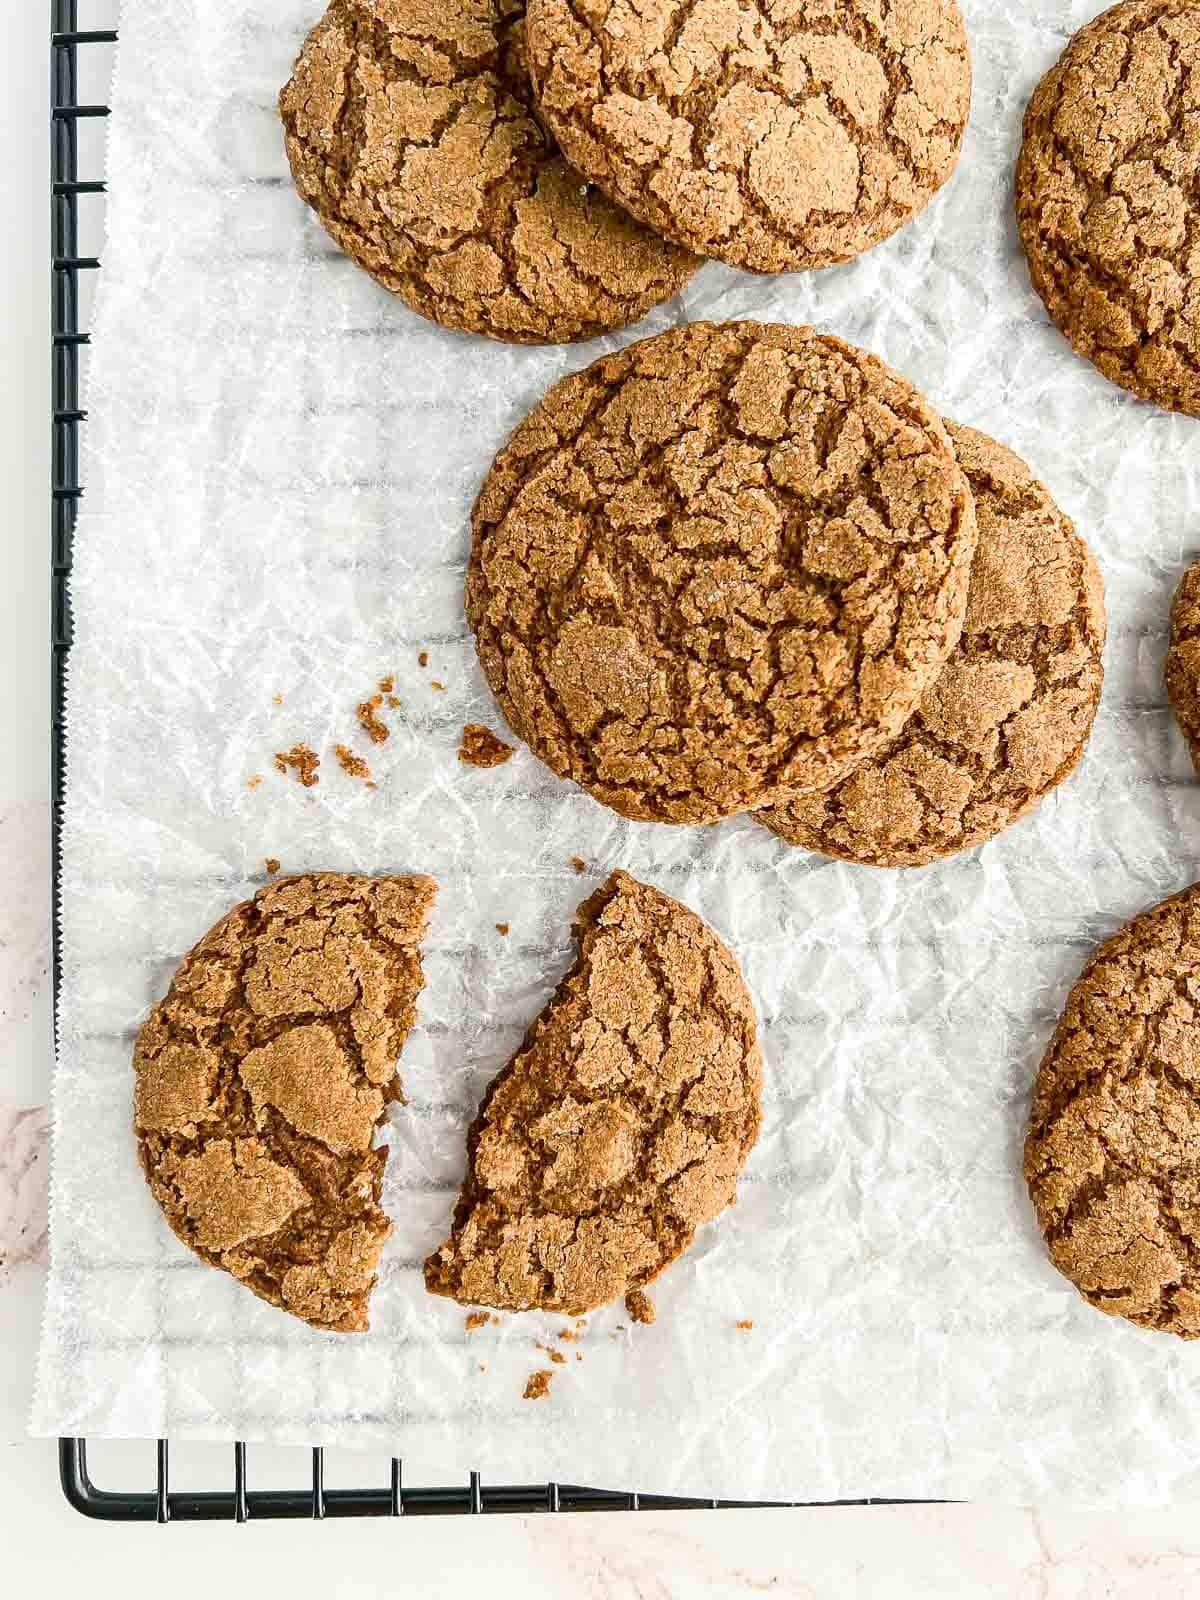 Cookies on a parchment paper-lined cooling rack with one cookie snapped in half.